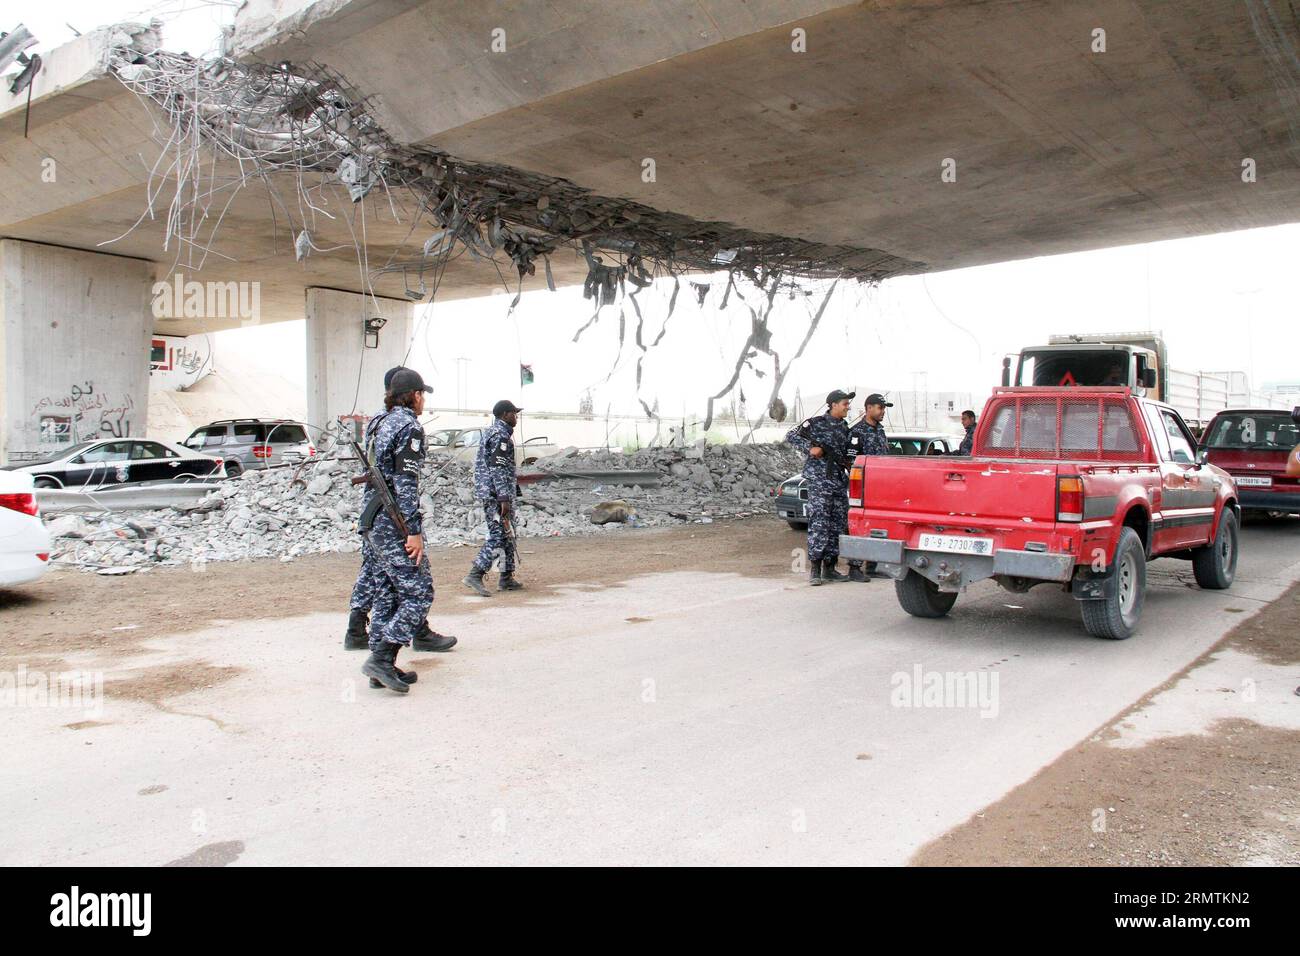 TRIPOLI, Sept. 9 -- Policemen inspect cars under a damaged bridge in Tripoli, Libya, on Sept. 9, 2014. A number of checkpoints were set up on some key roads in Tripoli by local policemen to maintain the security in the capital city. Since July, Tripoli has been seeing bloody clashes between armed Islamist groups and pro-secular militias. ) LIBYA-TRIPOLI-SECURITY HamzaxTurkia PUBLICATIONxNOTxINxCHN   Tripoli Sept 9 Policemen inspect Cars Under a damaged Bridge in Tripoli Libya ON Sept 9 2014 a Number of Checkpoints Were Set up ON Some Key Roads in Tripoli by Local Policemen to maintain The Secu Stock Photo